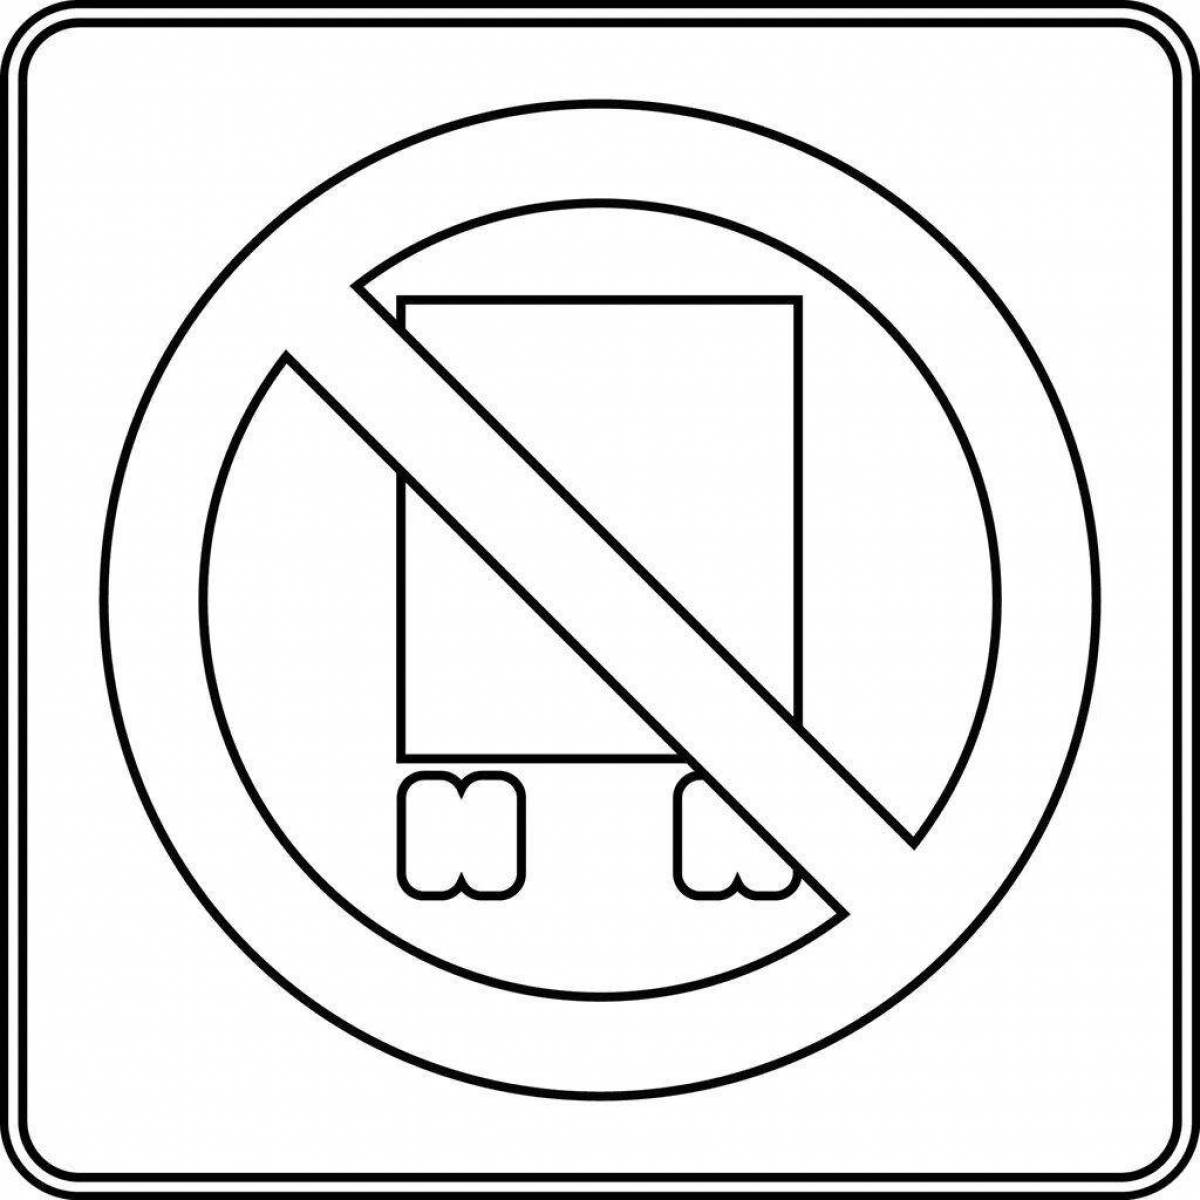 Coloring book shining prohibitory road sign